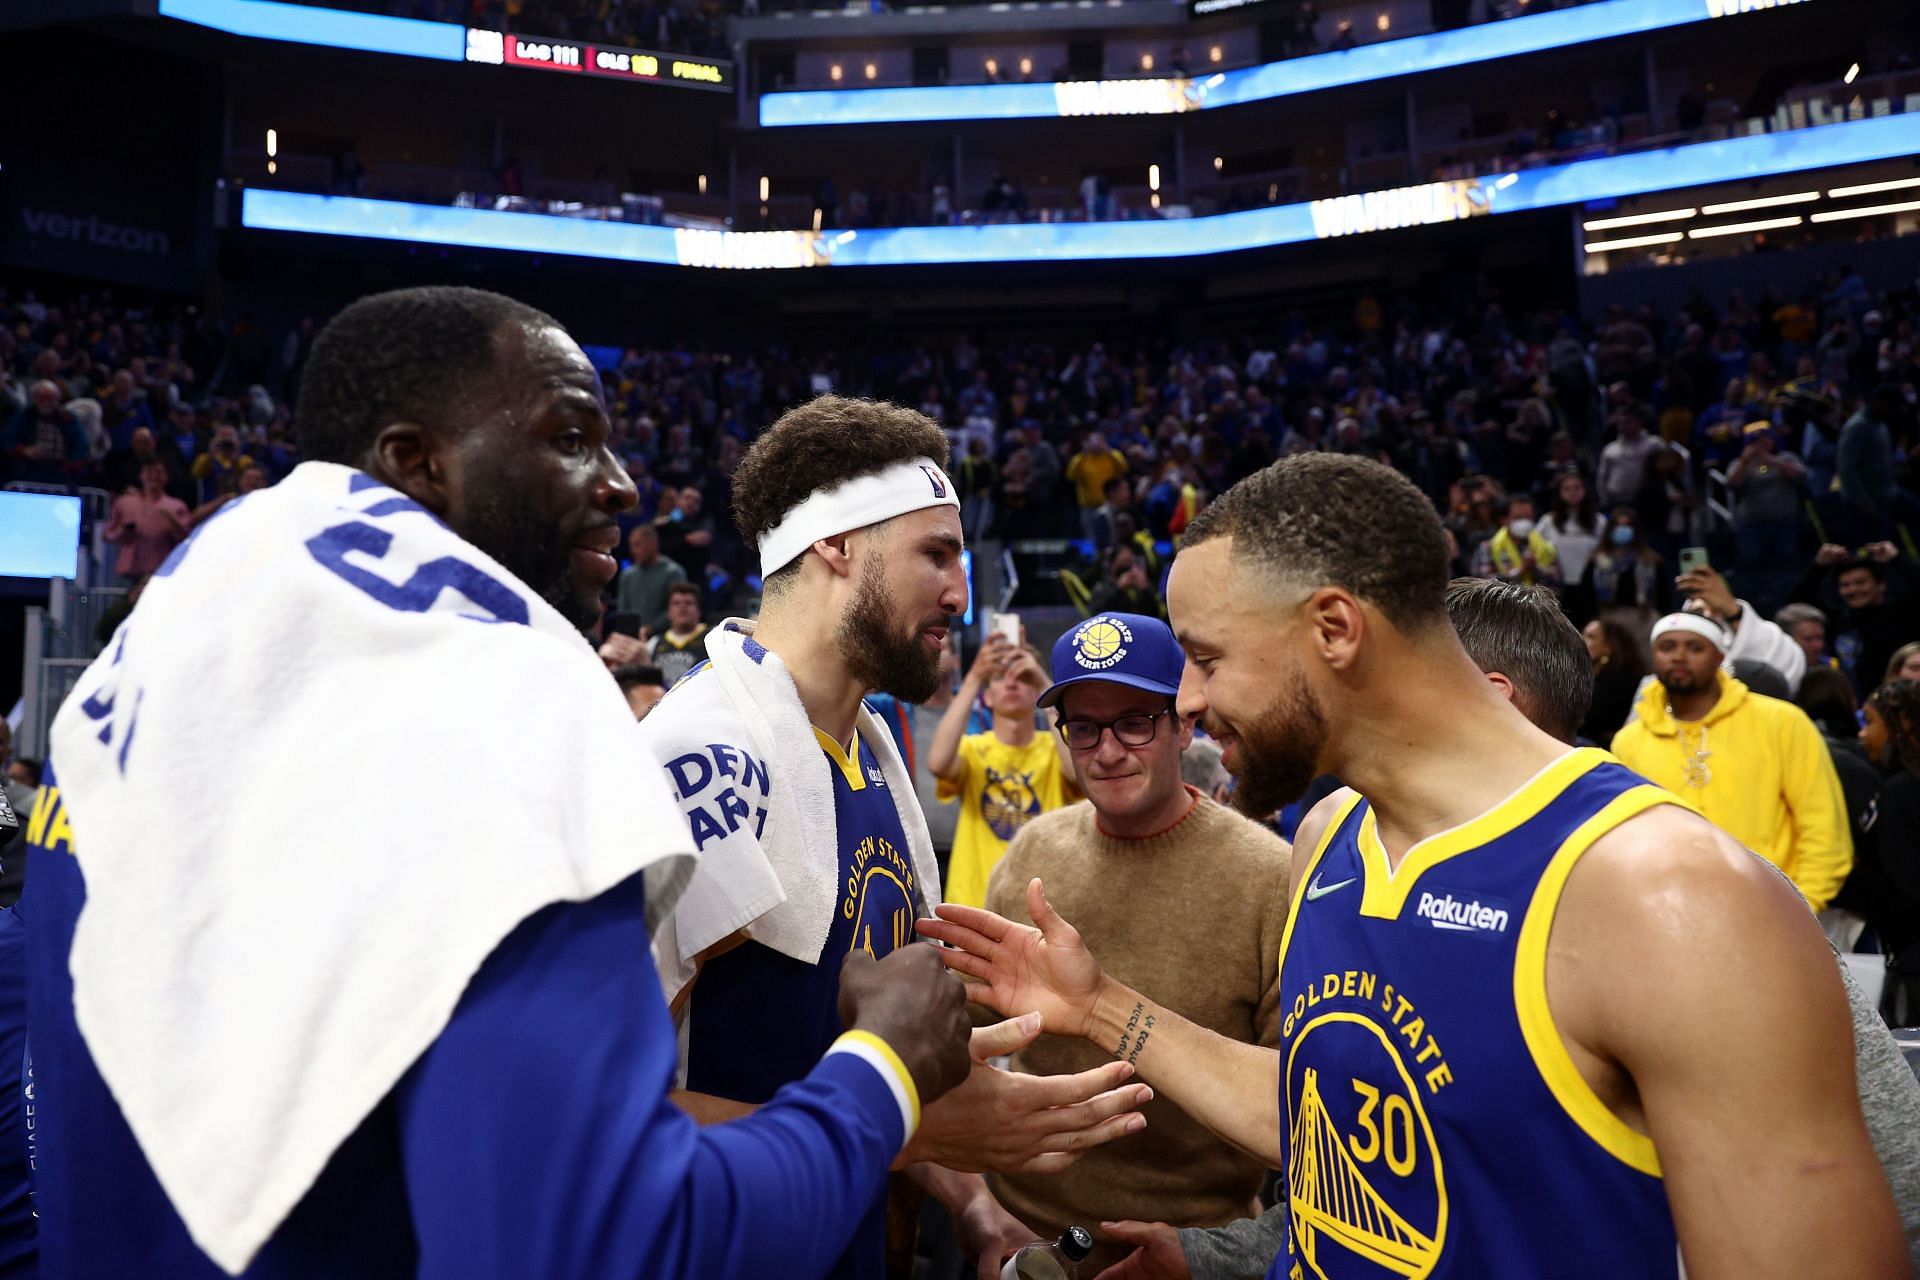 Stephen Curry #30, Klay Thompson #11 and Draymond Green #23 of the Golden State Warriors congratulate one another after winning a game